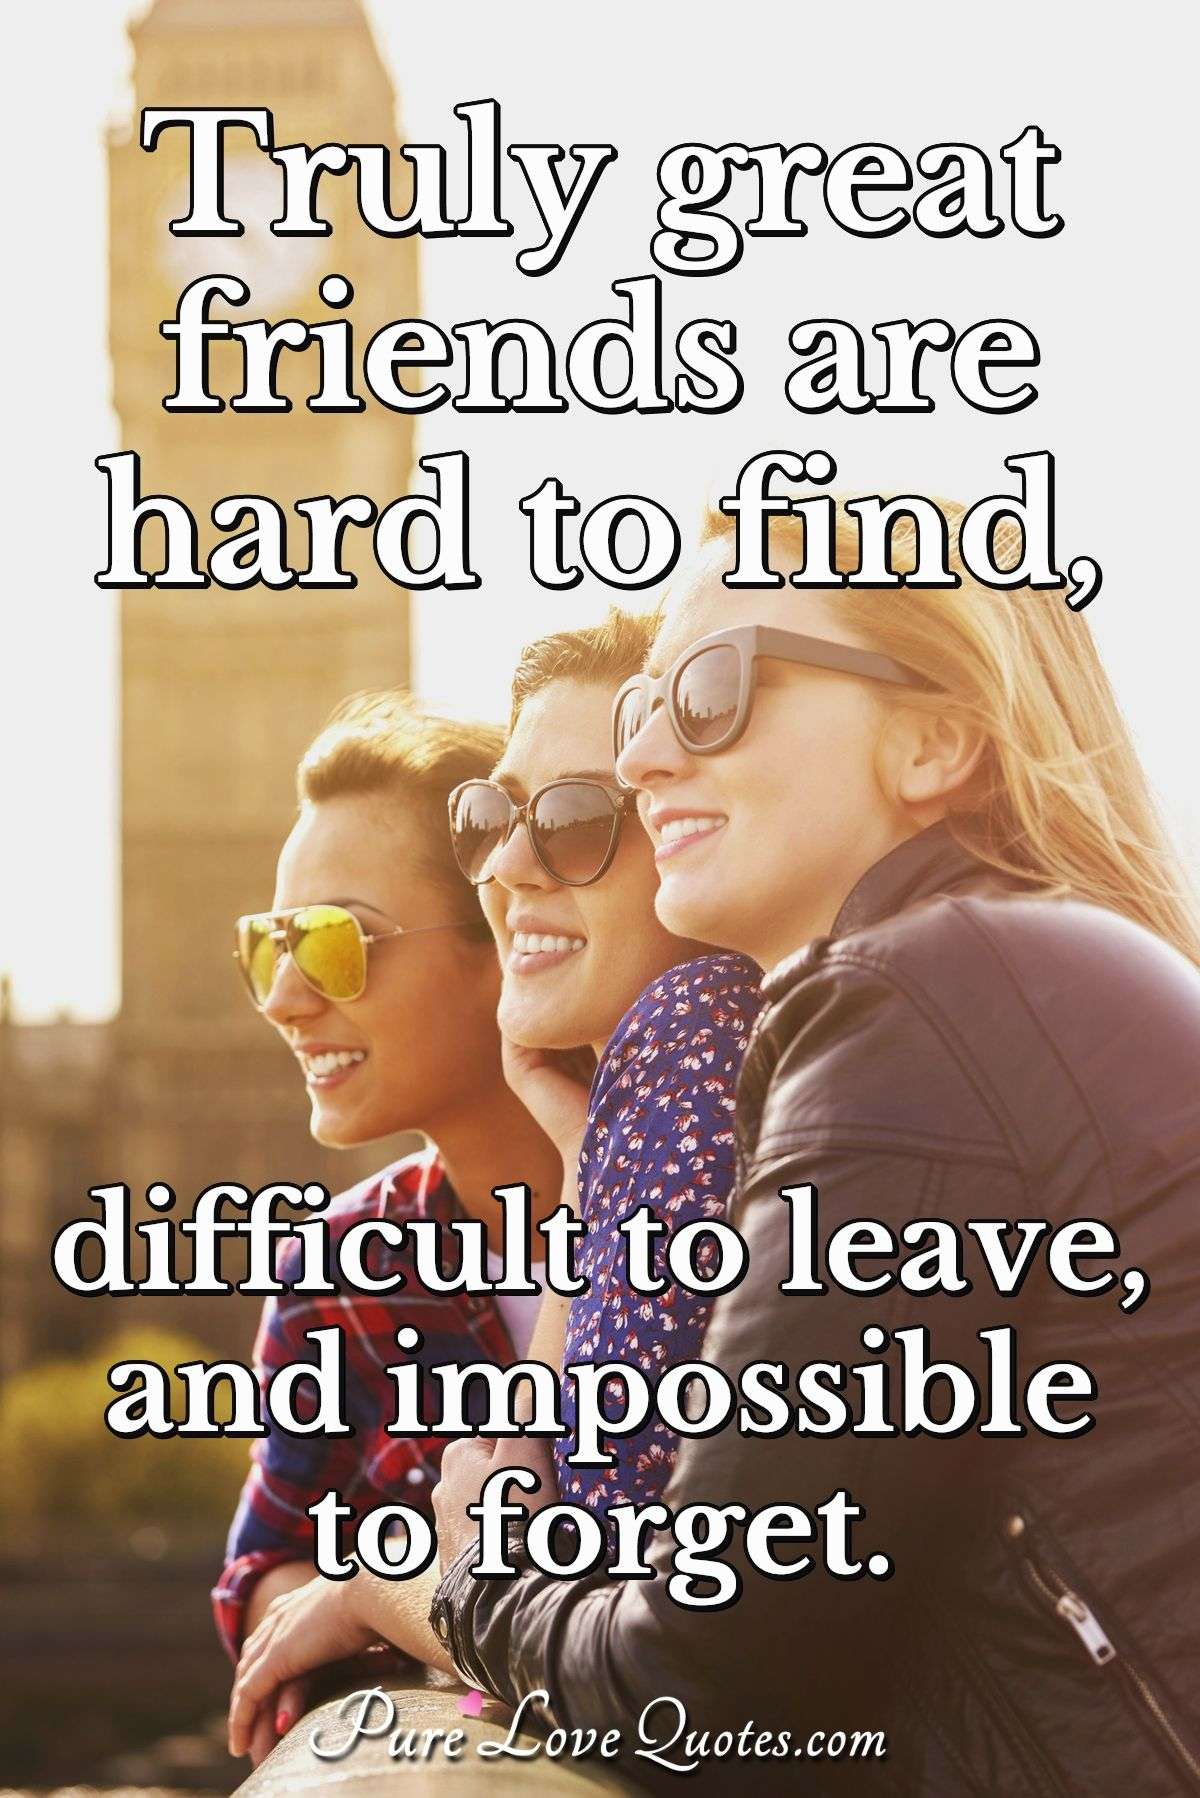 Truly great friends are hard to find, difficult to leave, and impossible to forget. - Anonymous